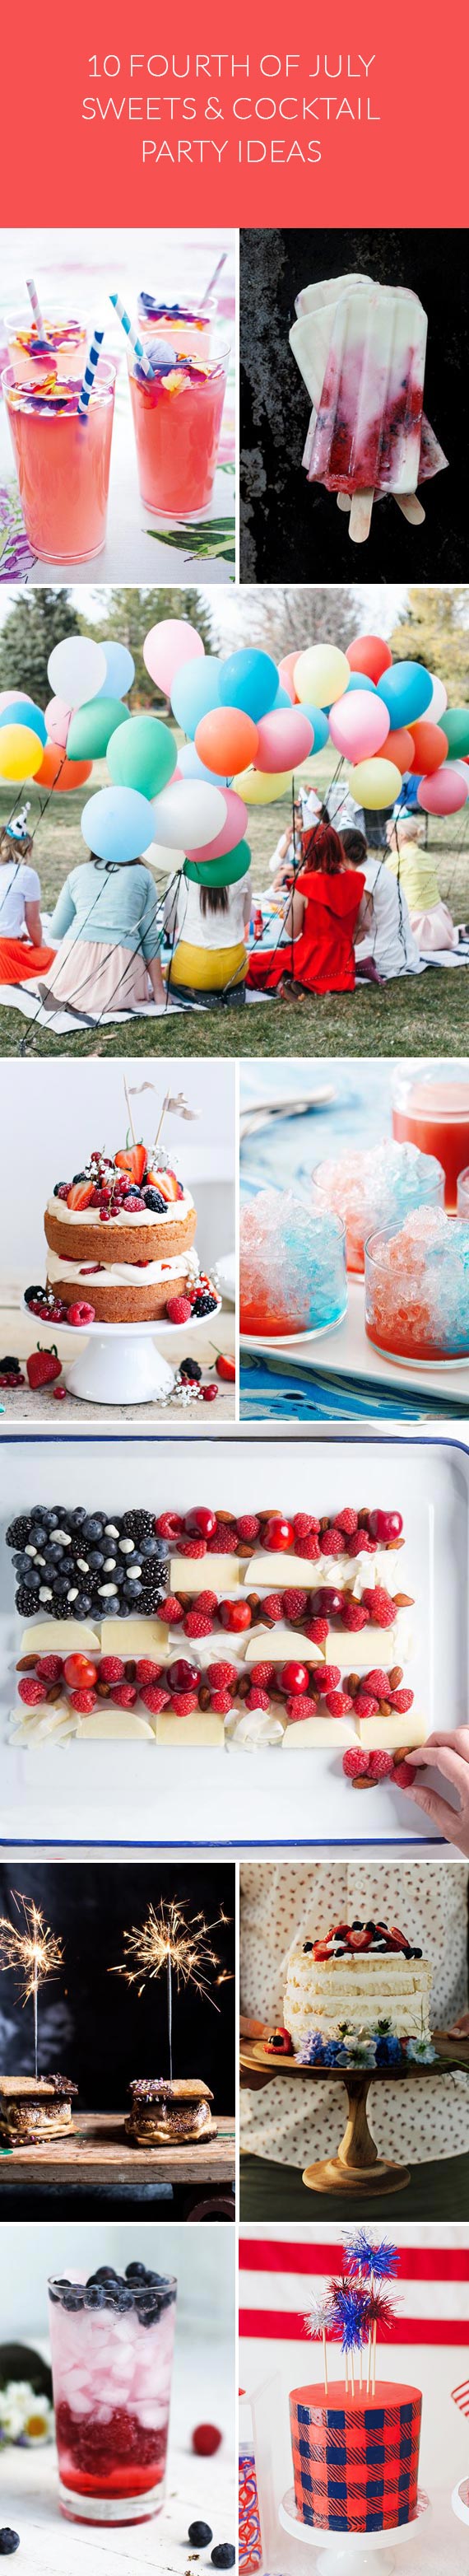 http://www.100layercake.com/blog/wp-content/uploads/2015/07/4th-of-July-party-ideas.jpg